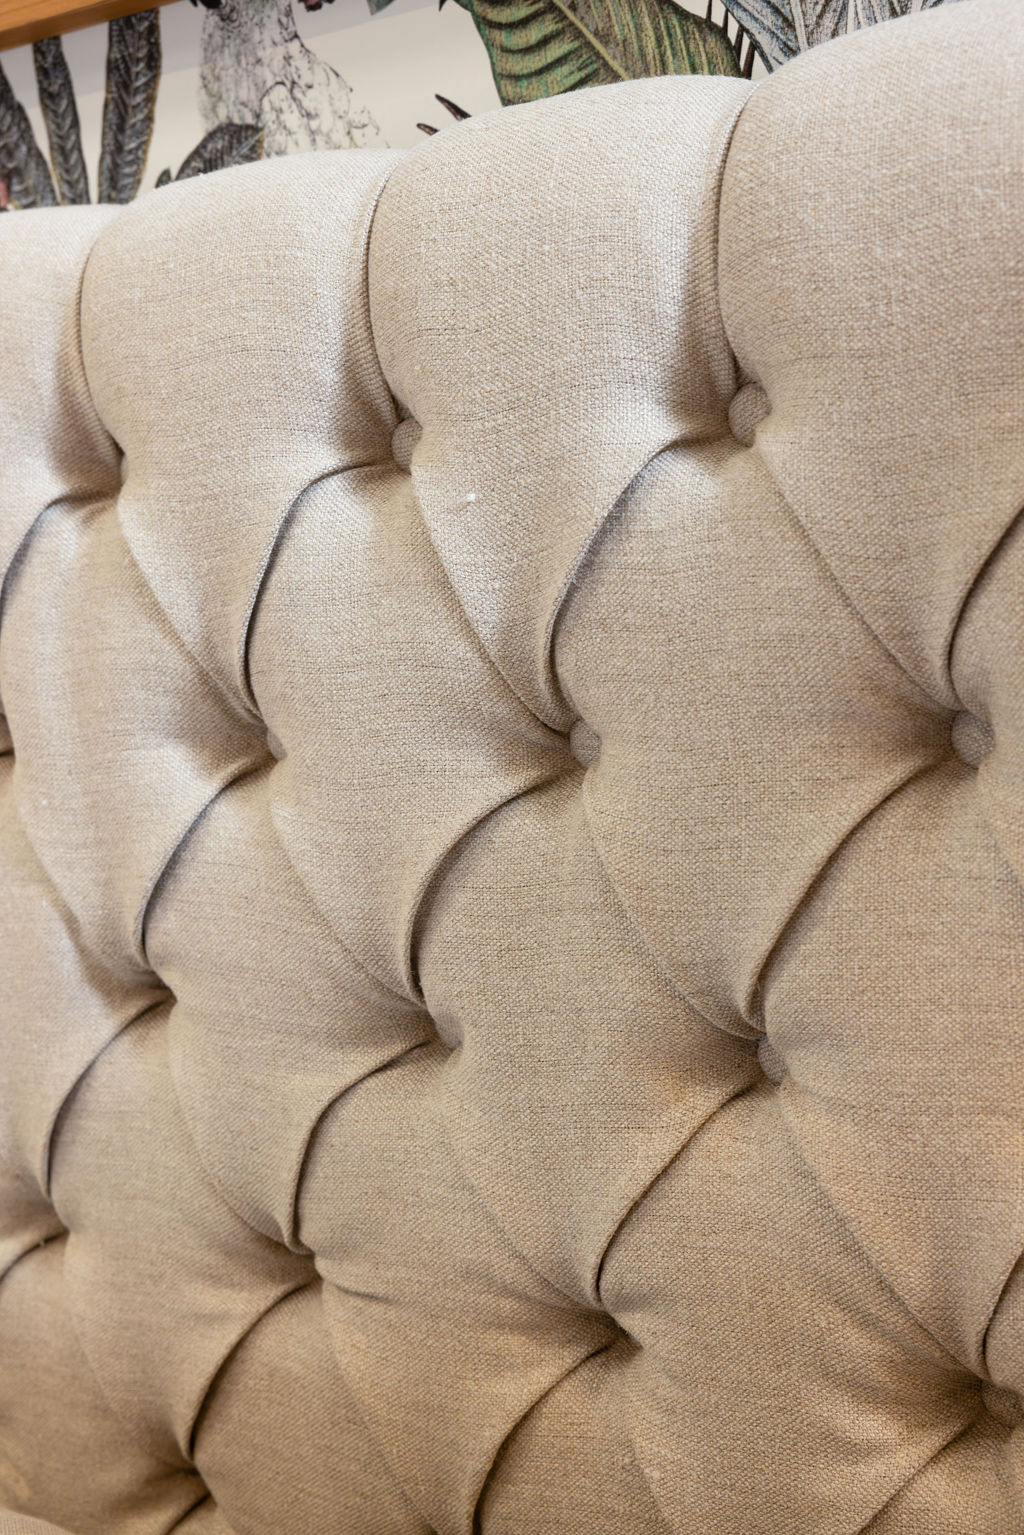 Block & Chisel button tufted beige linen upholstered queen size headboard Château Collection